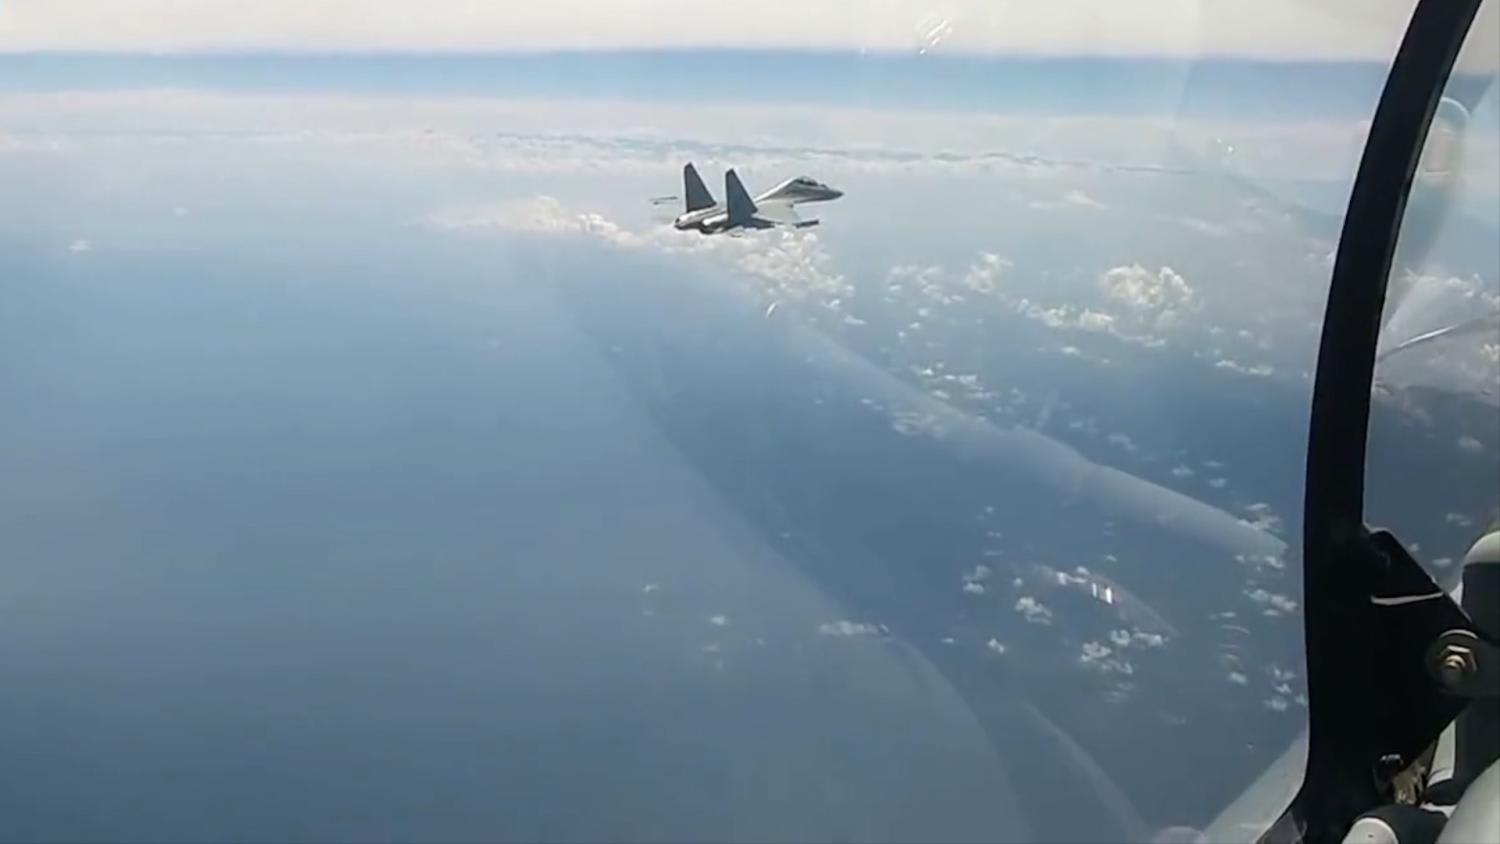 Footage released on Aug 8, 2022 by the Eastern Theatre Command of the People's Liberation Army showing multiple types of warships, aircrafts and fighter jets participating in the joint combat training exercises.